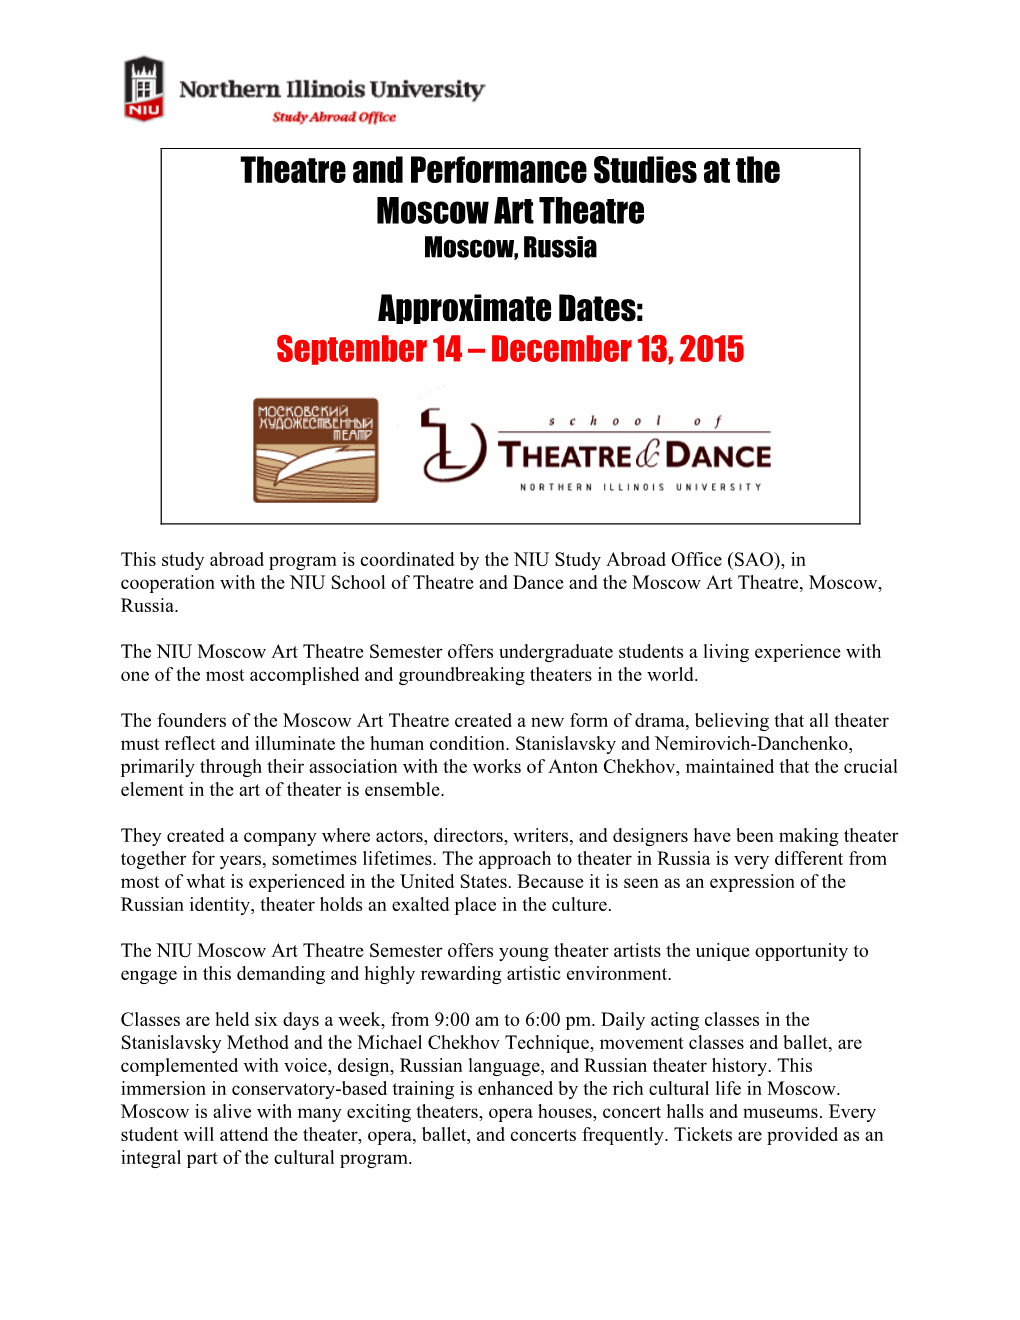 Theatre and Performance Studies at the Moscow Art Theatre Moscow, Russia